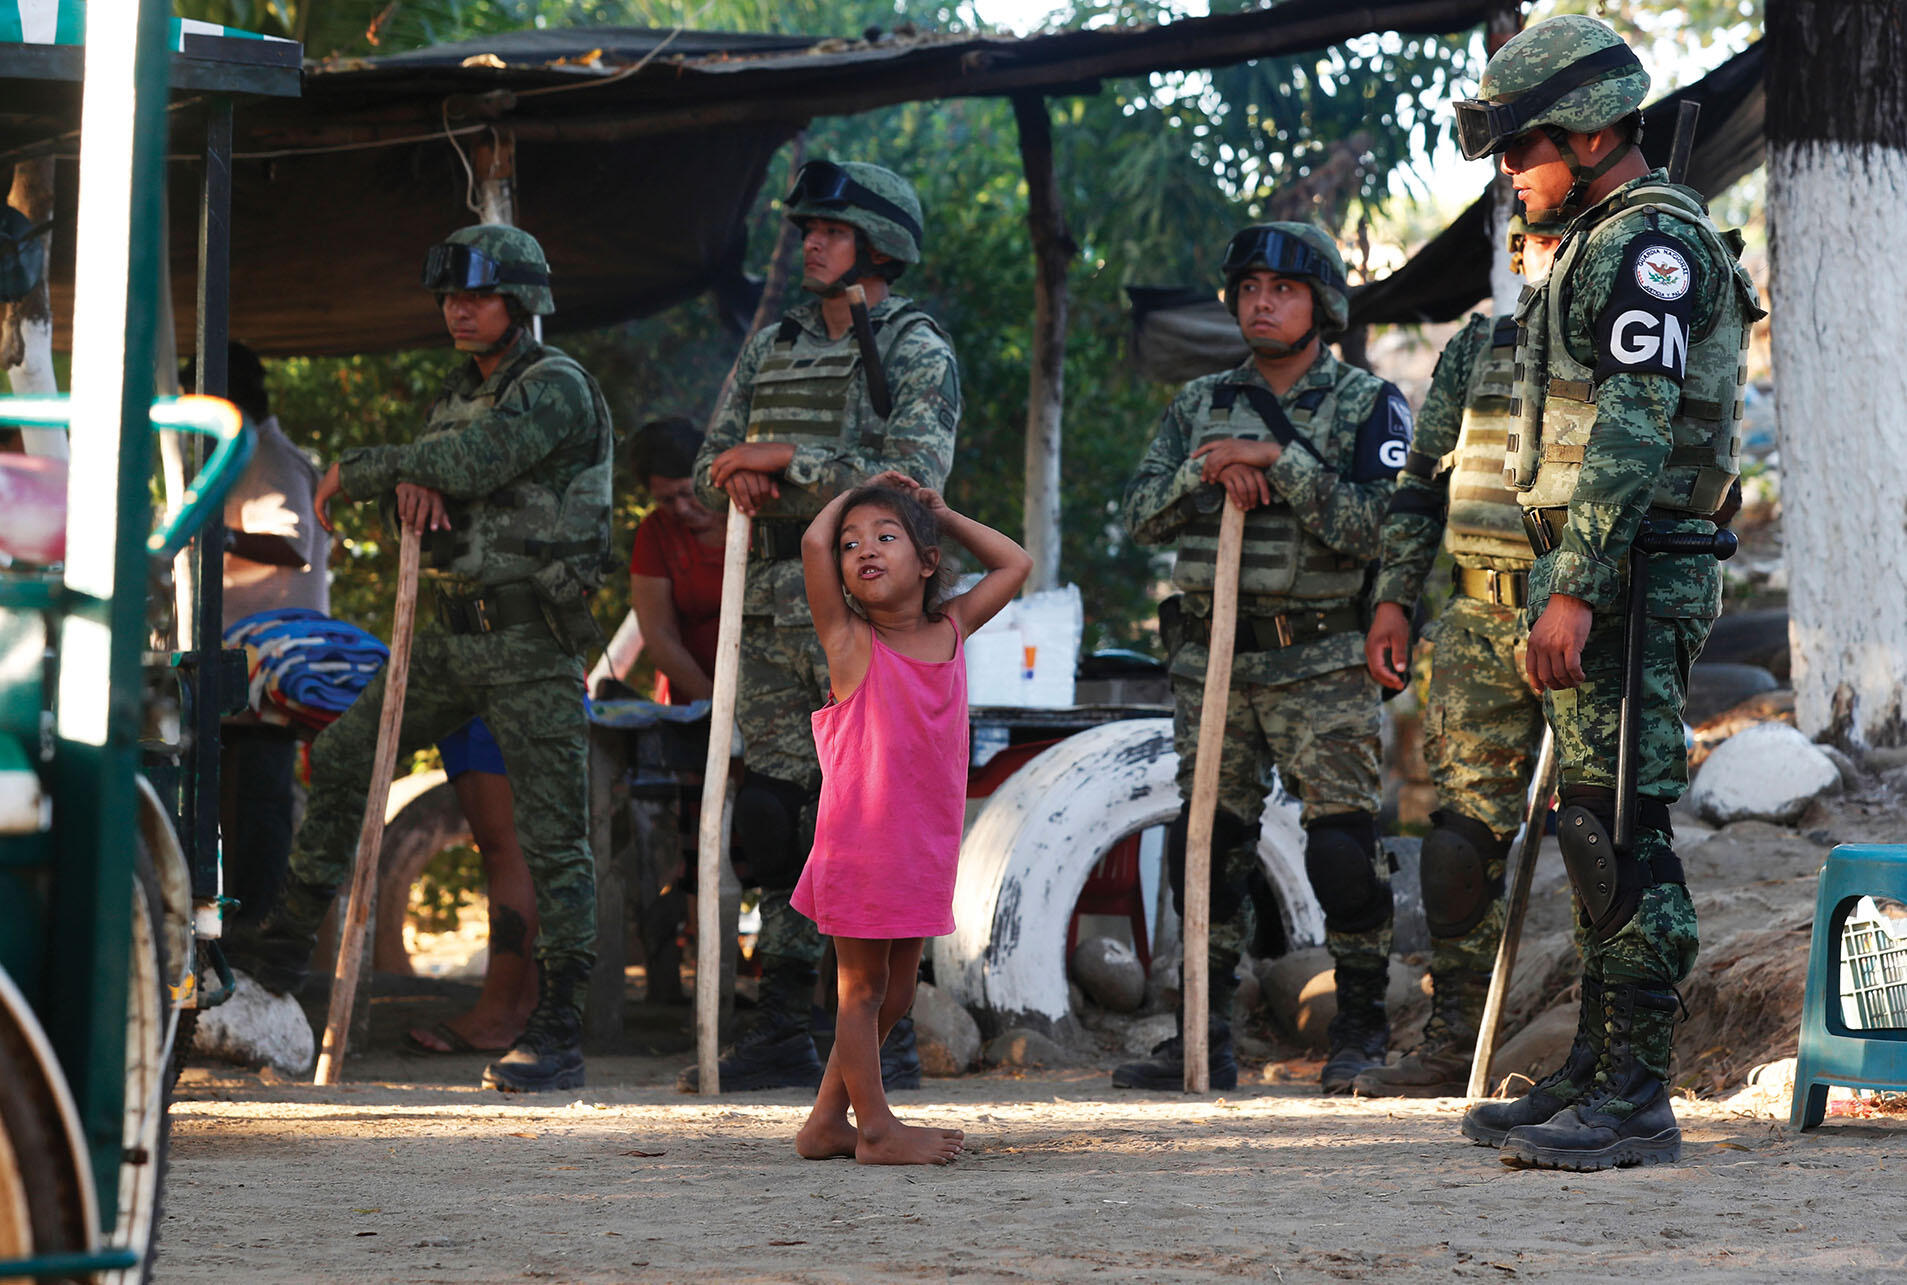 A Central American migrant child plays while Mexican National Guards detain her family on the border with Guatemala, January 2020. (Photo by Marco Ugarte/AP Photo.)